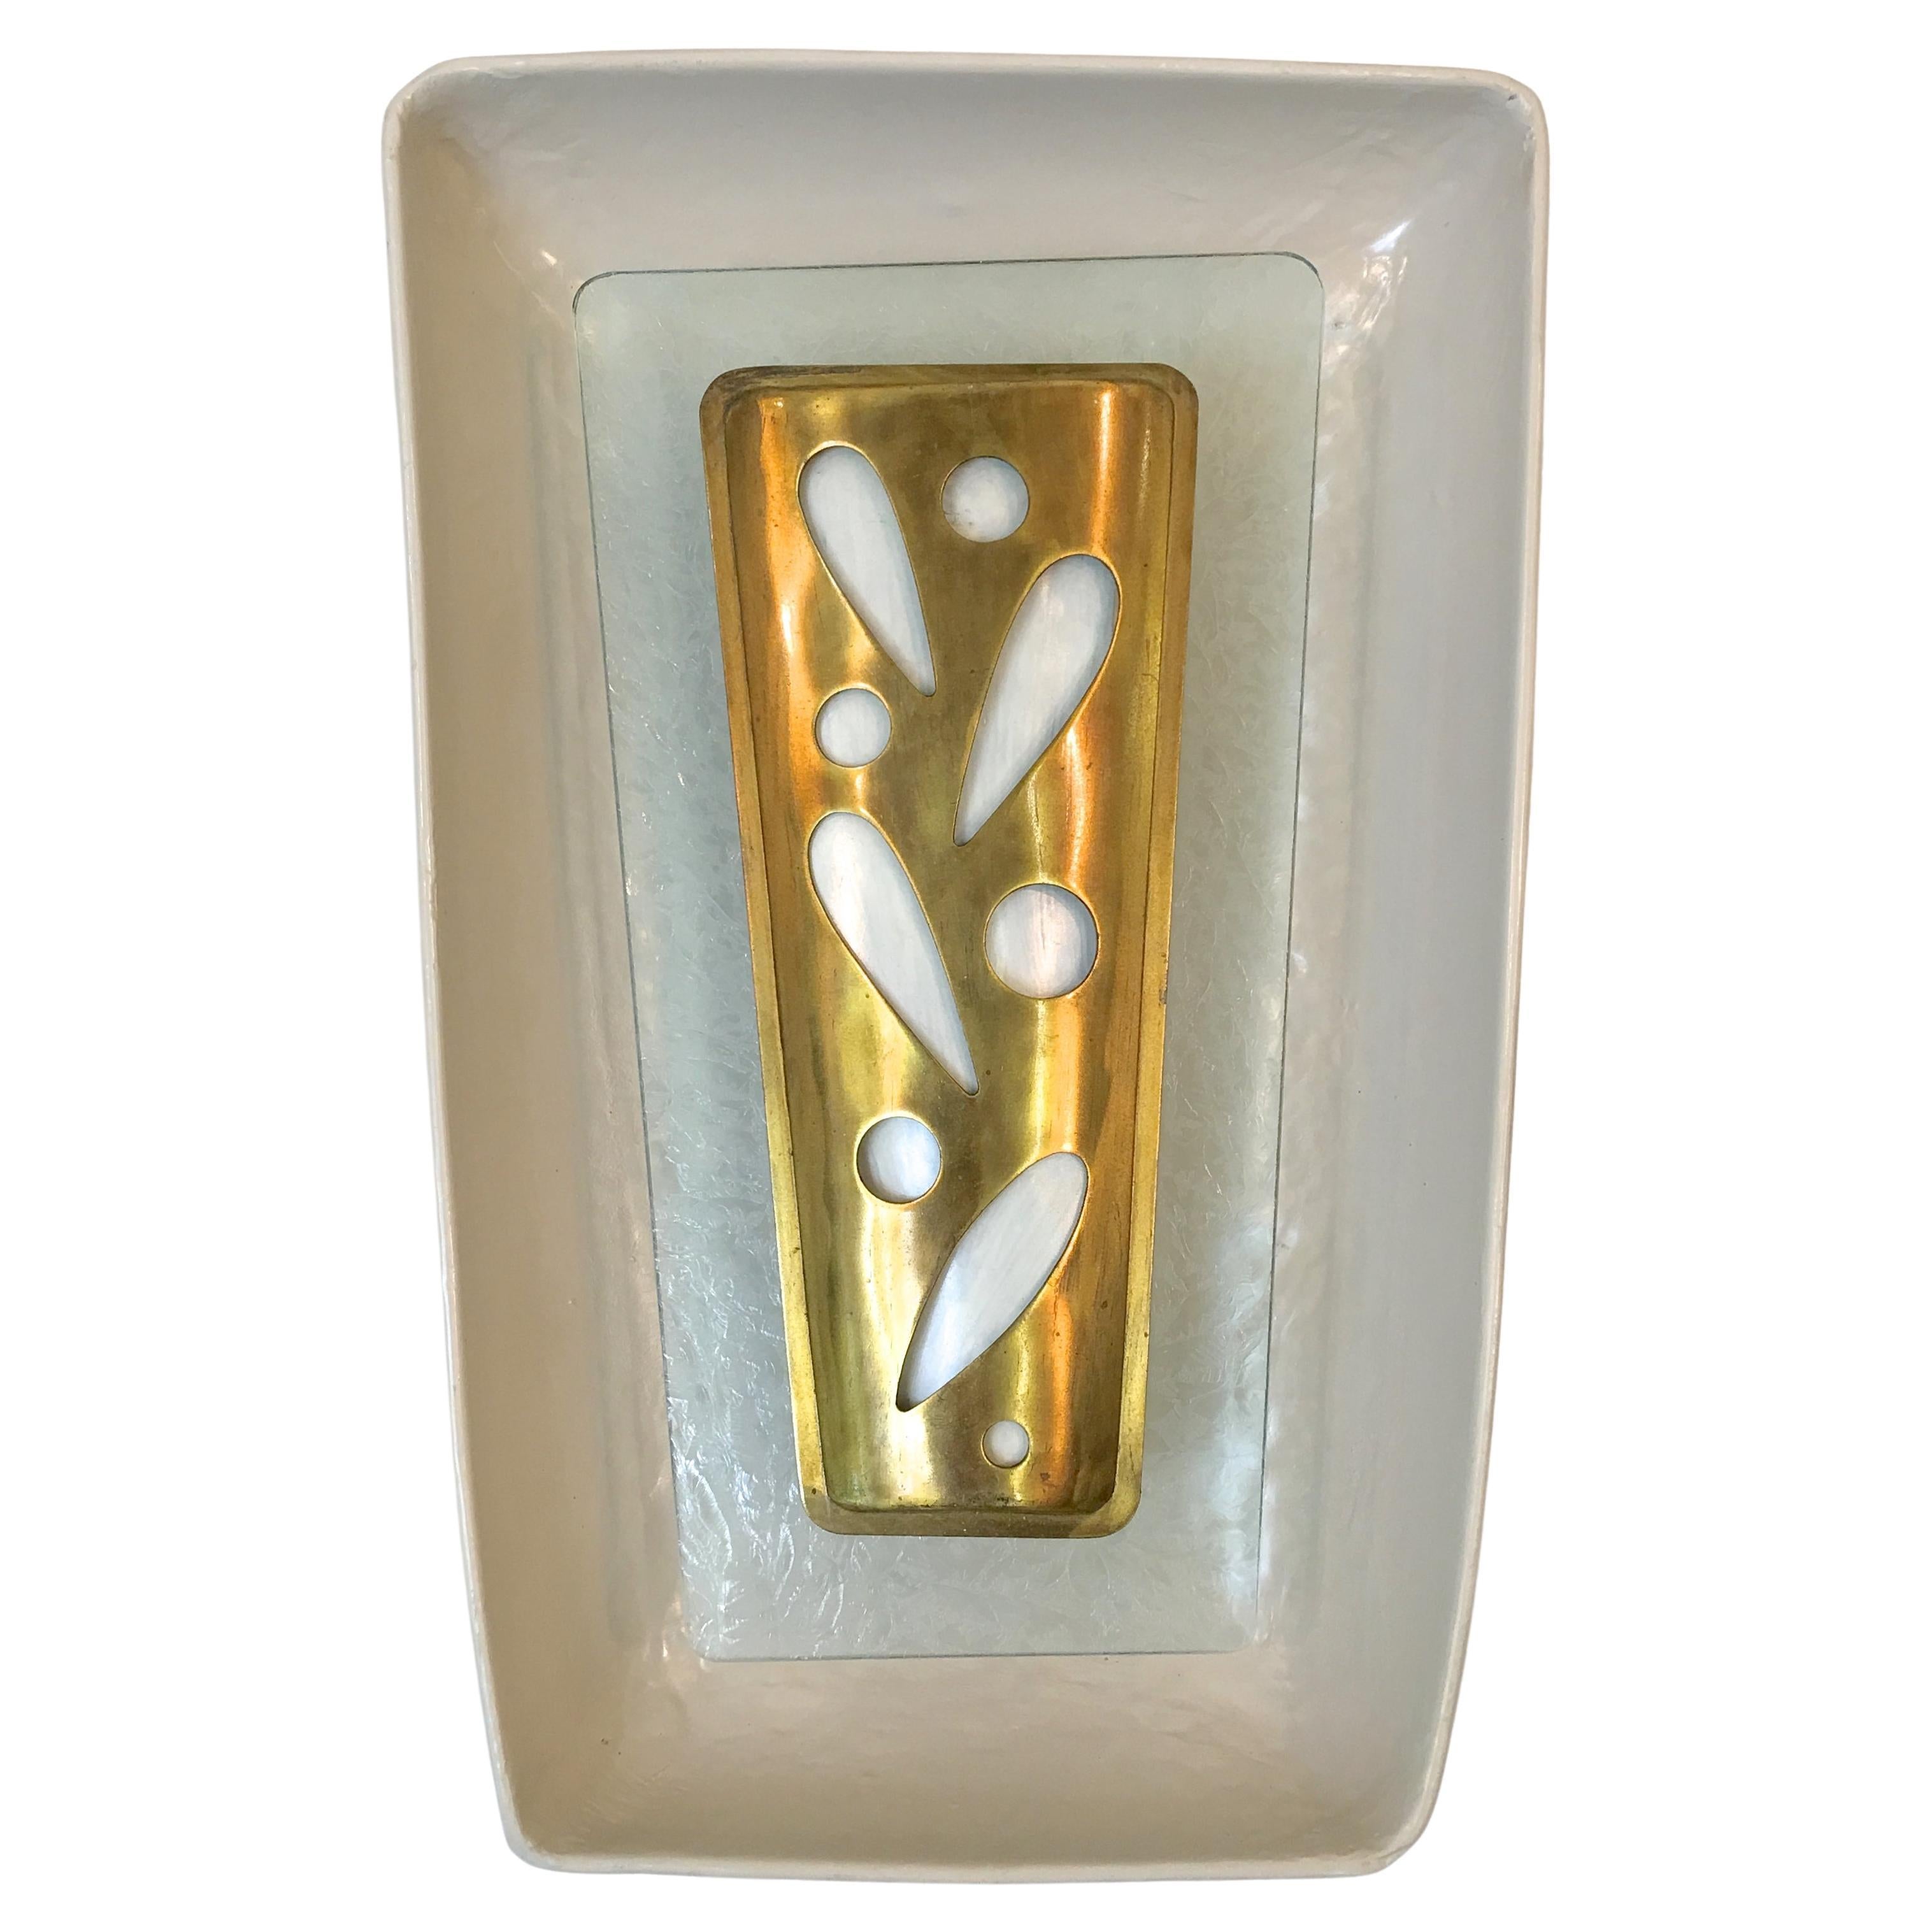 Gio Ponti Wall Sconce from the m/s Augustus Italian Ocean Liner 1951 For Sale